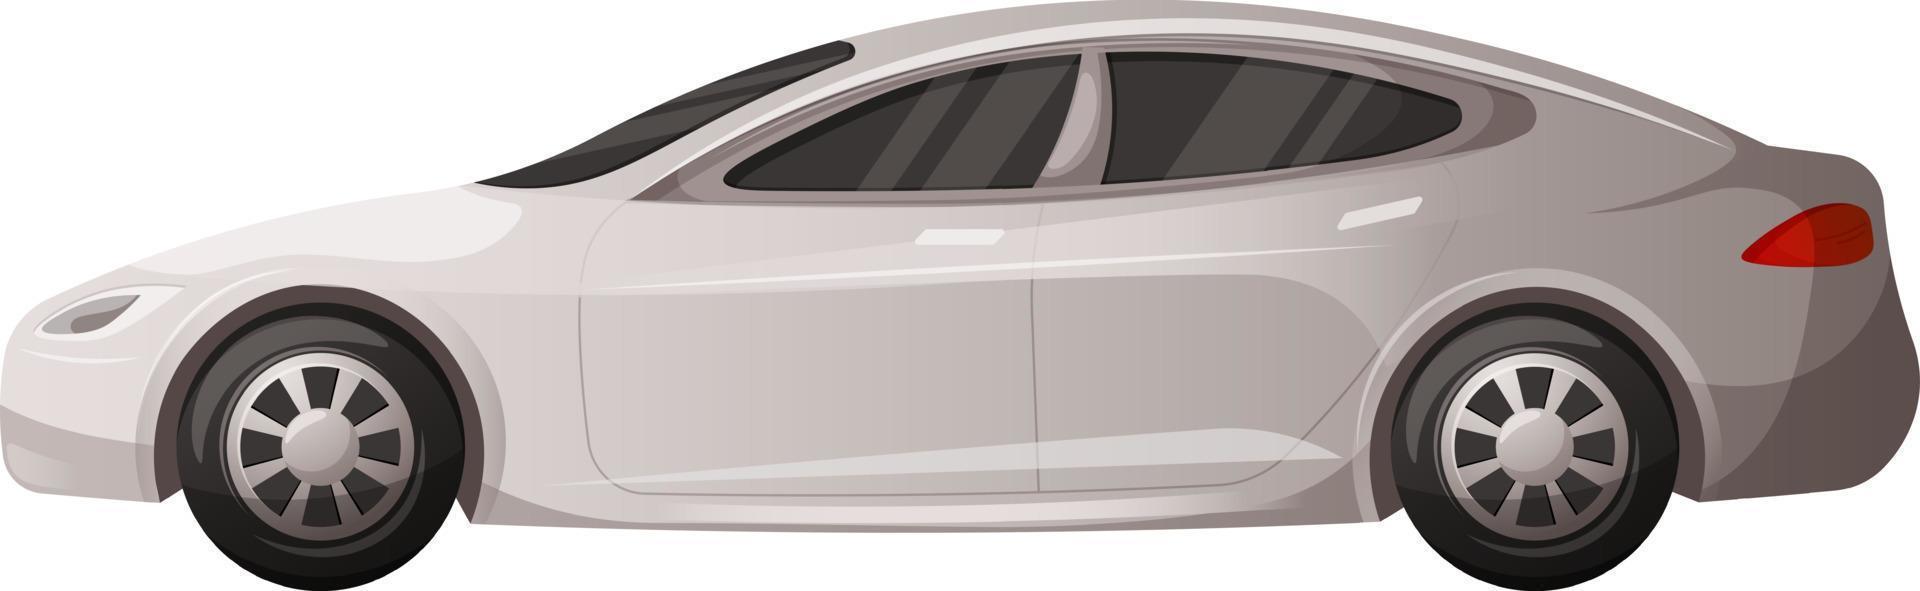 Modern car, white car isolated on transparent background. Vector cartoon illustration of cars with sedan cab